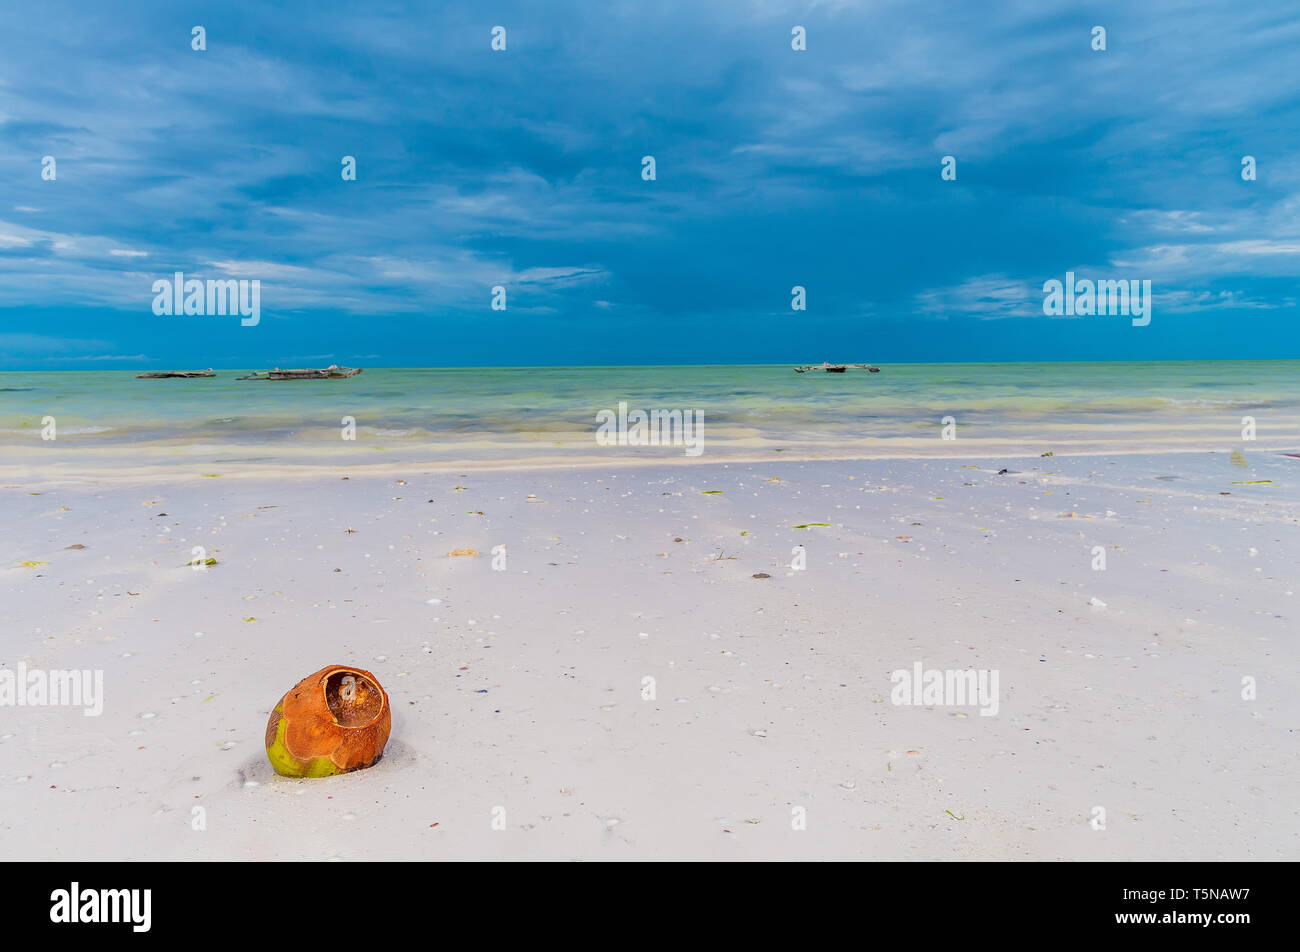 One empty coconut shell lies on the white sand of the ocean beach, close-up and horizon line. Stock Photo